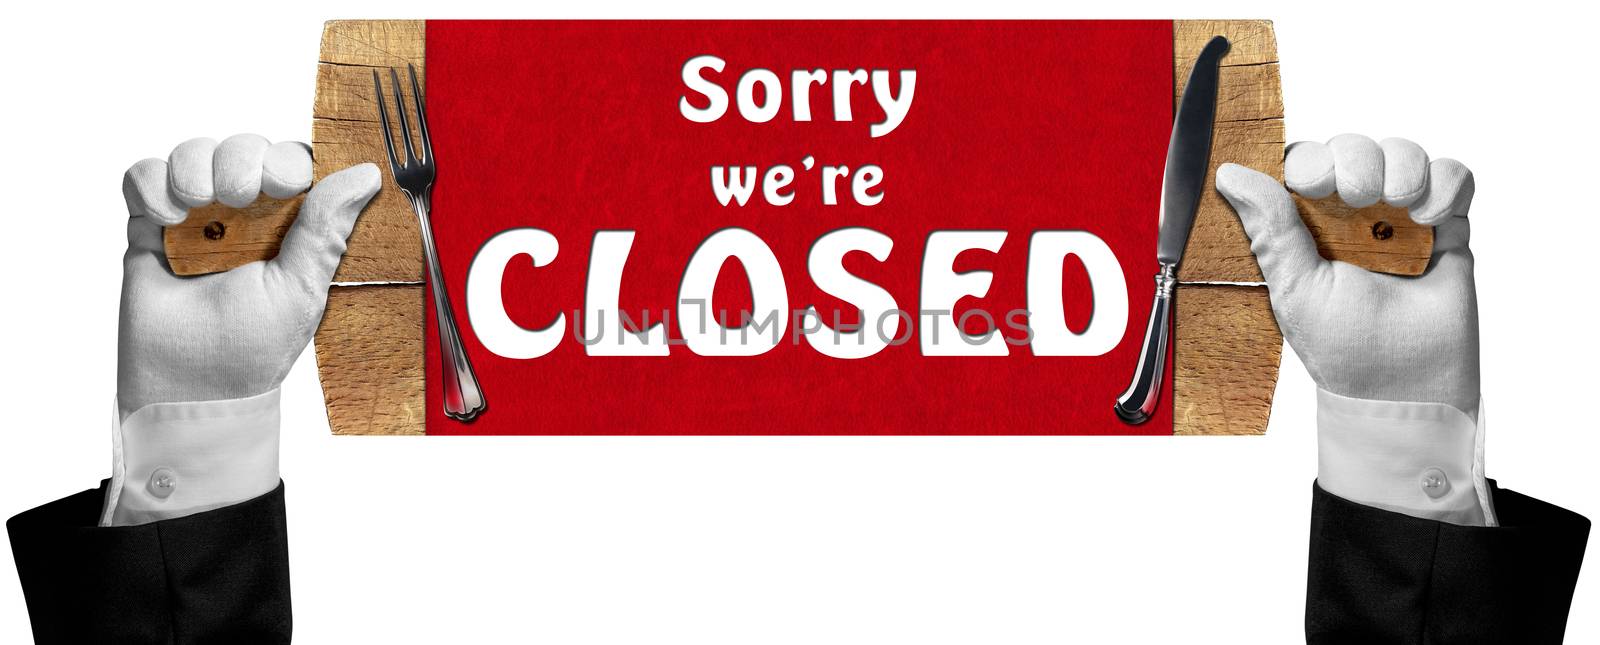 Sorry we are Closed -  Sign with Hands of Waiter by catalby